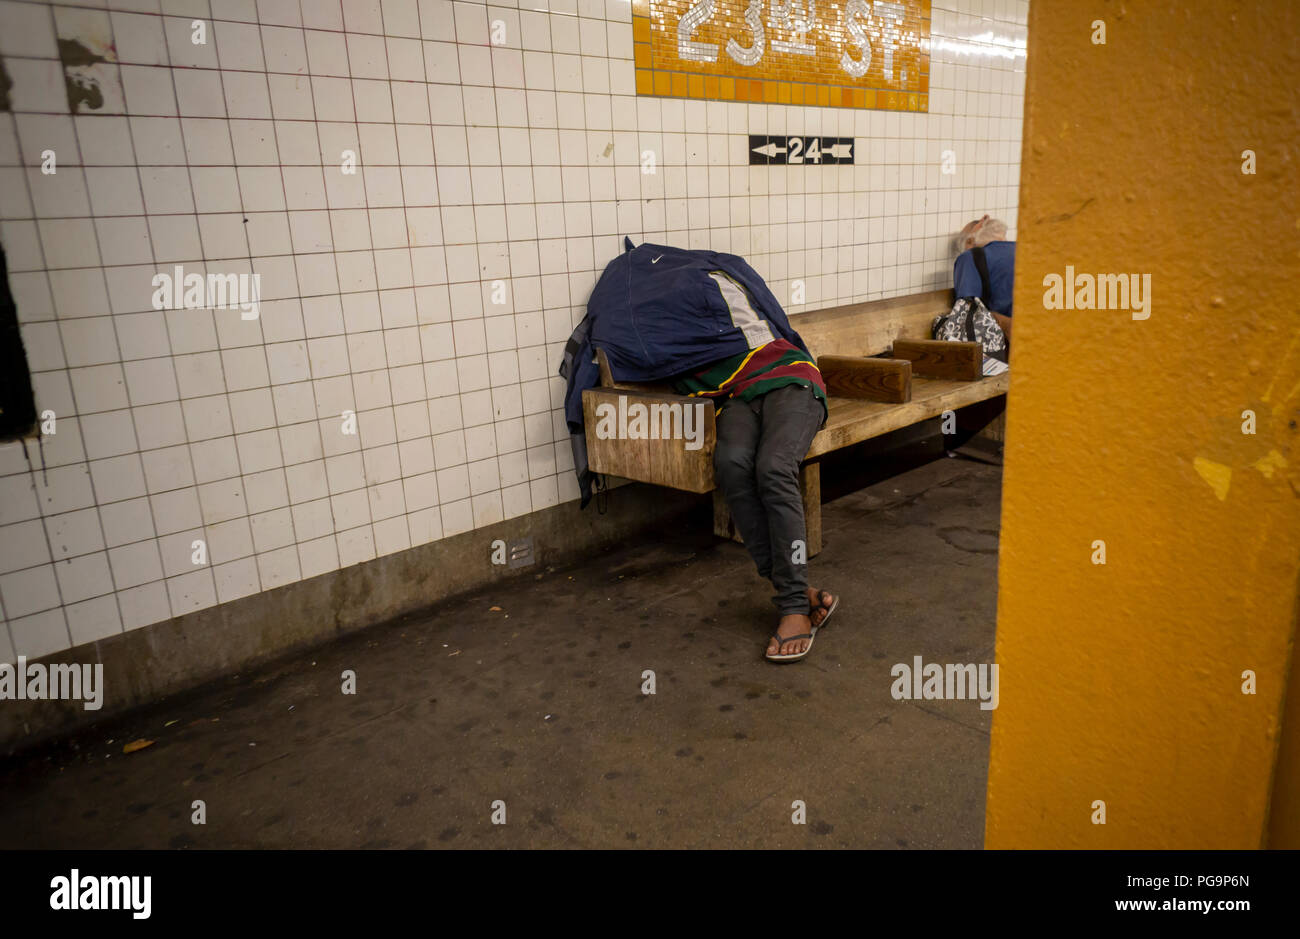 A homeless individual is seen sleeping in the West 23rd Street IND subway station in New York on Wednesday, August 22, 2018. (Â© Richard B. Levine) Stock Photo